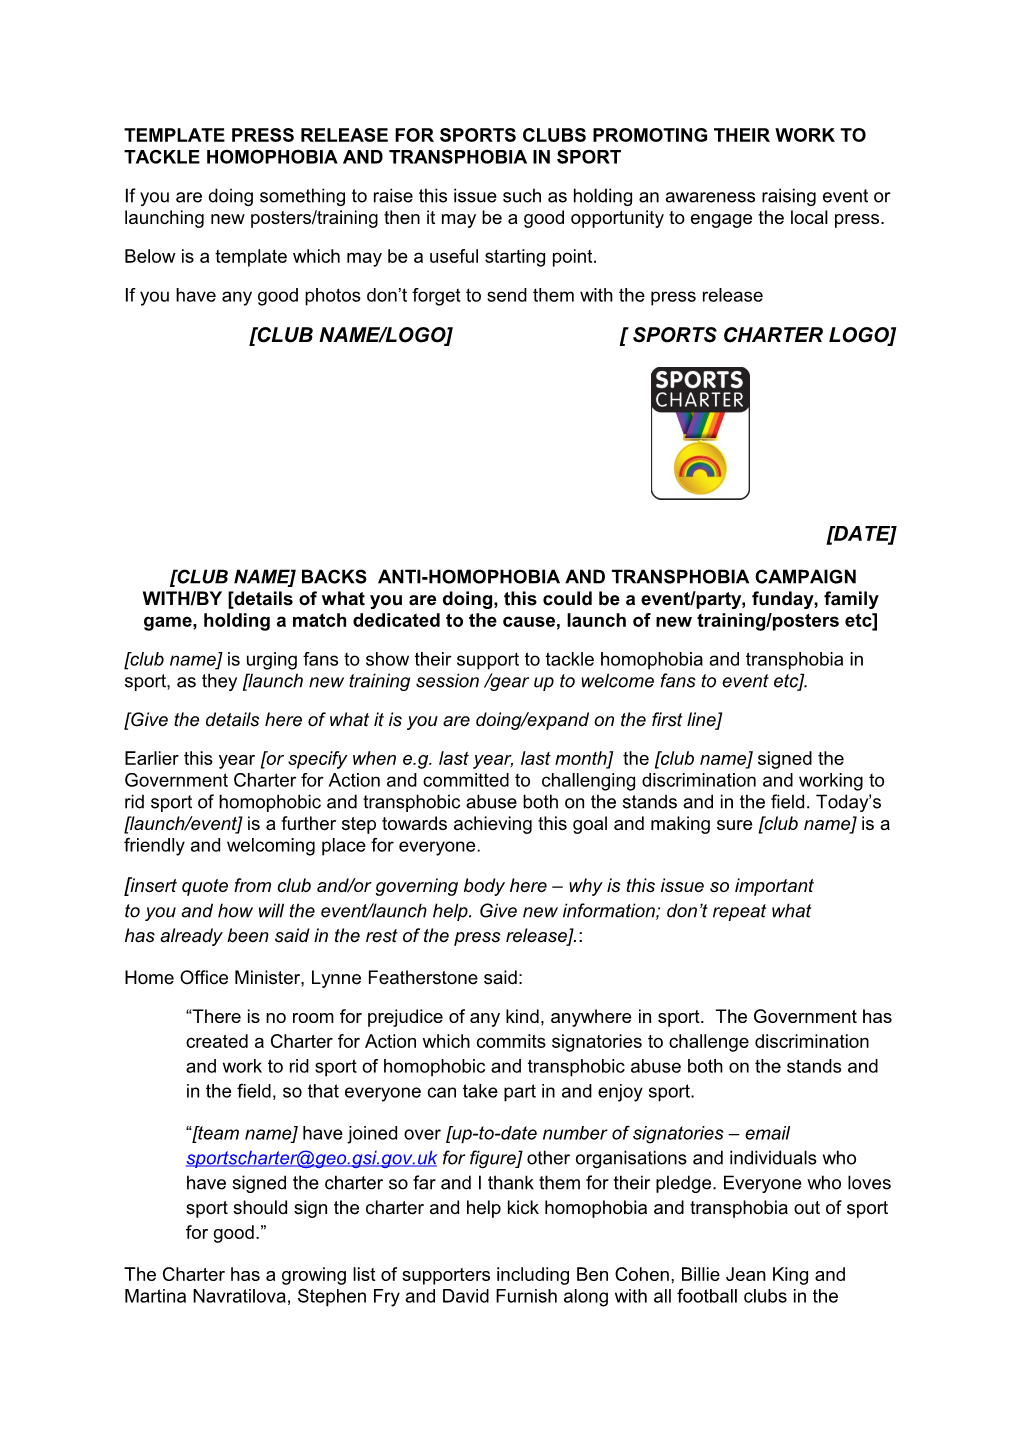 Template Press Release for Sports Clubs Promoting Their Work to Tackle Homophobia And